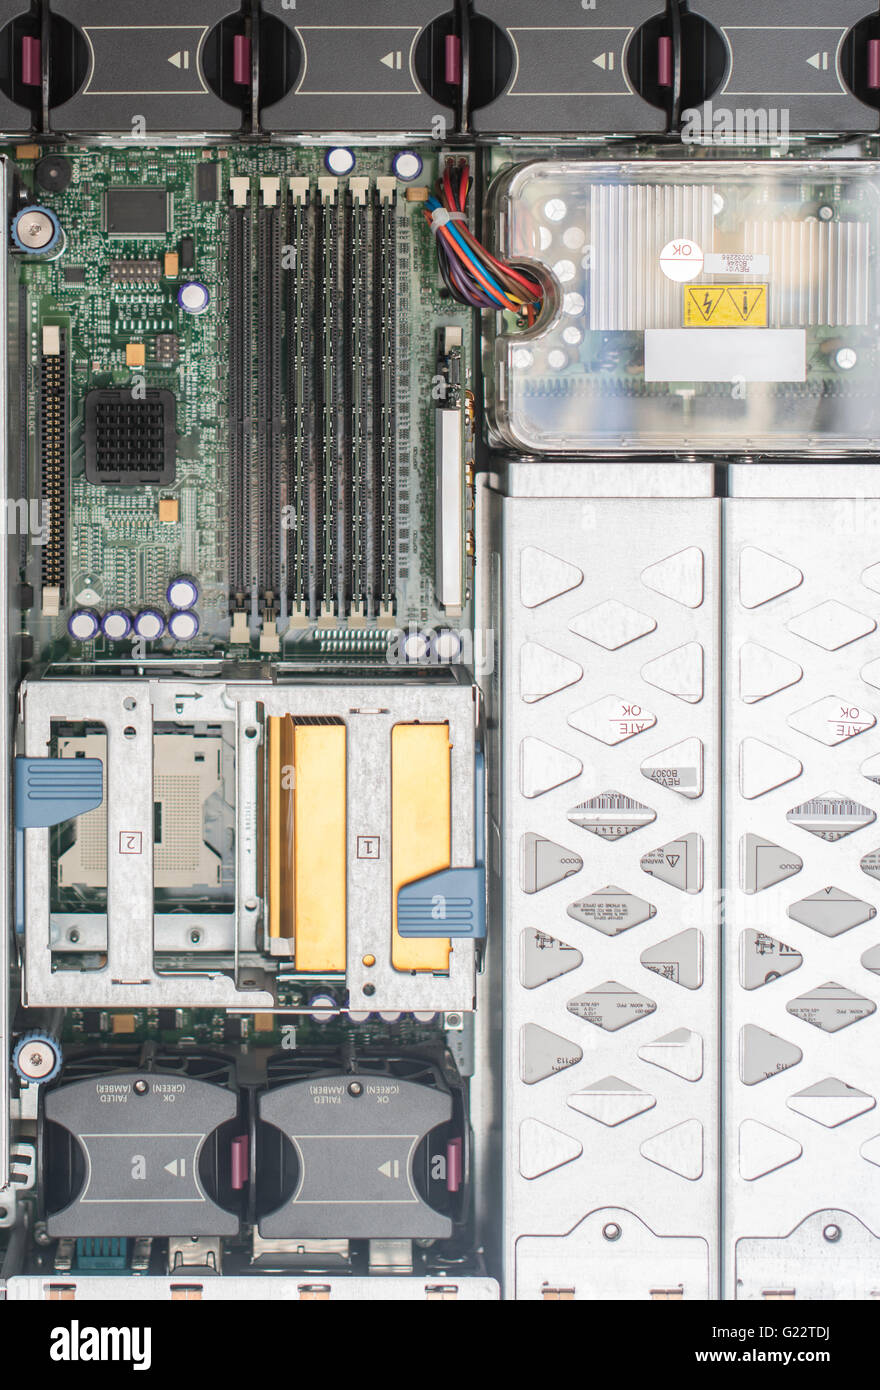 Top view of server pc. Motherboard, CPU, cooler fans and RAM memory. Stock Photo